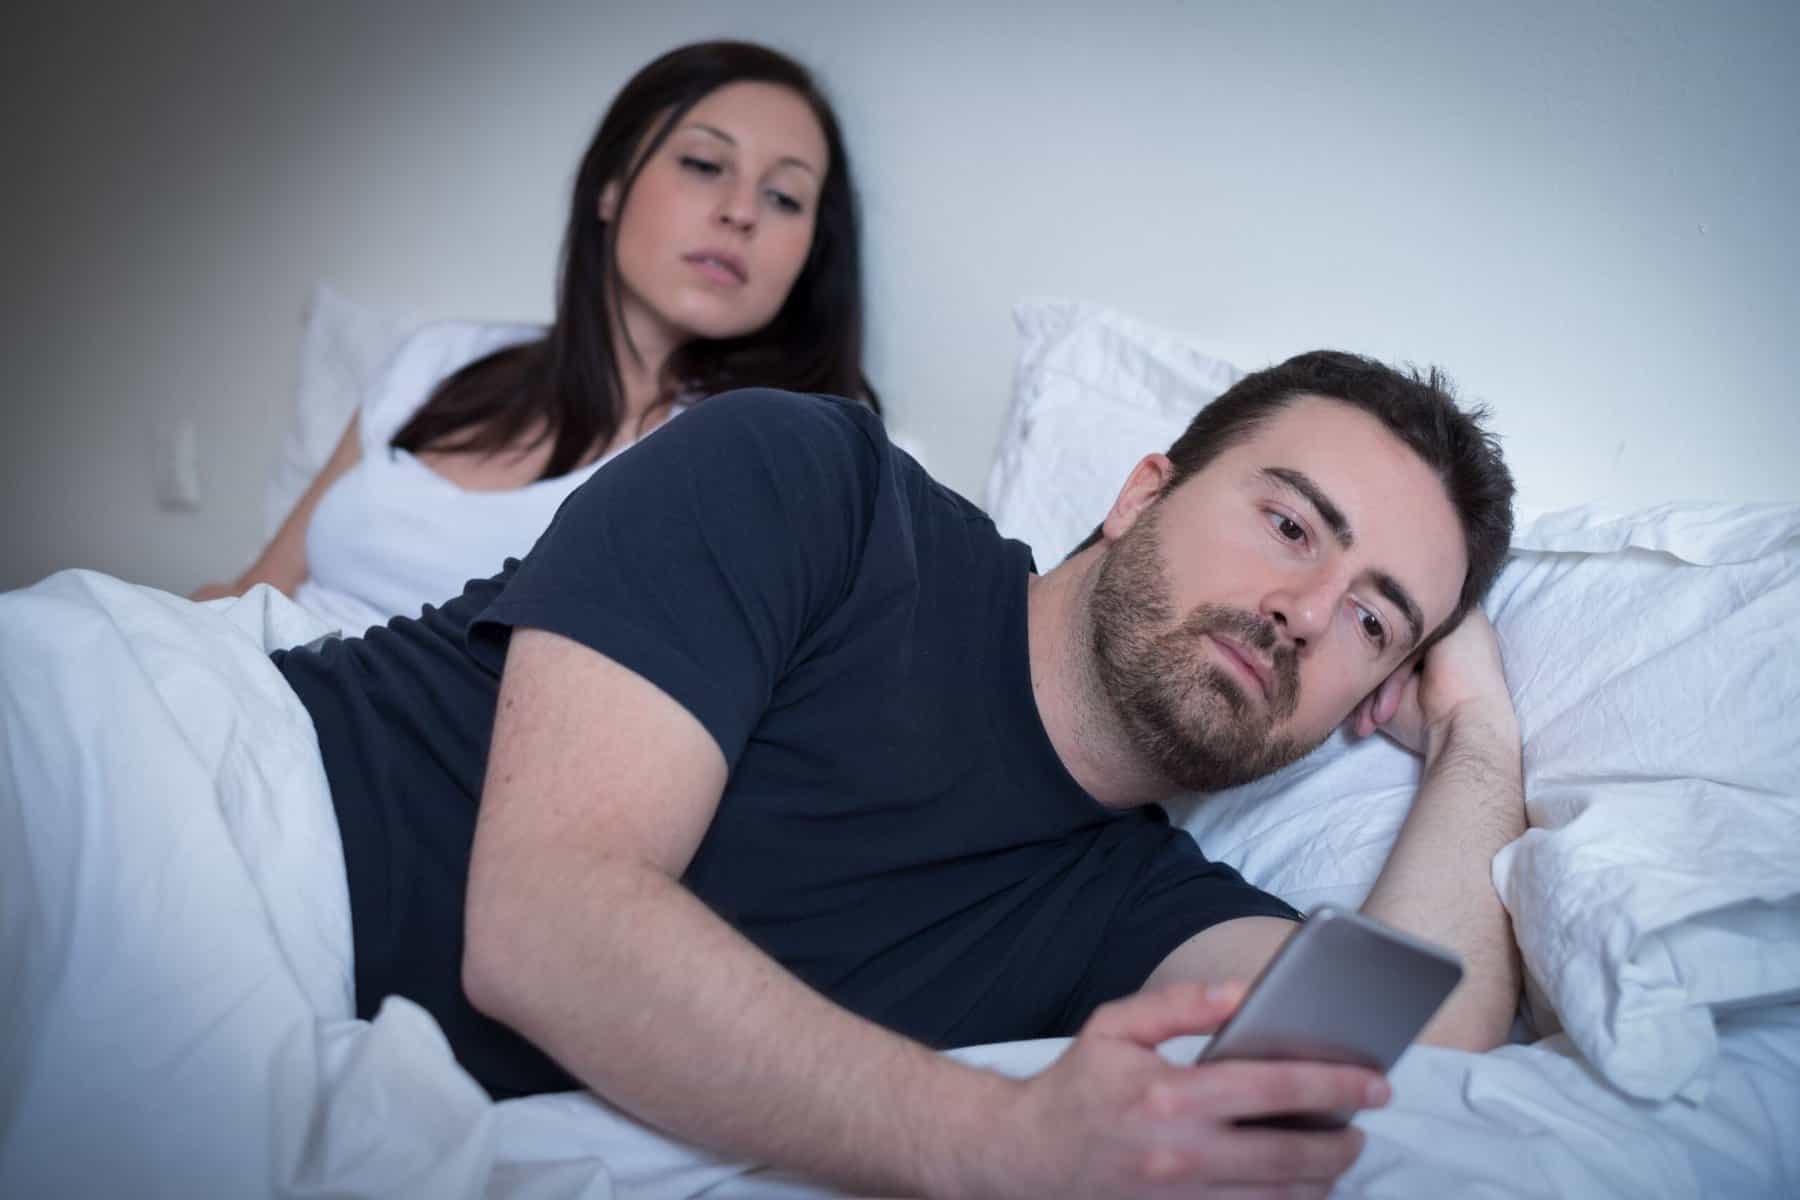 Sleeping Husband - Partner With a Porn Addiction | New Jersey | Enlightened Solutions